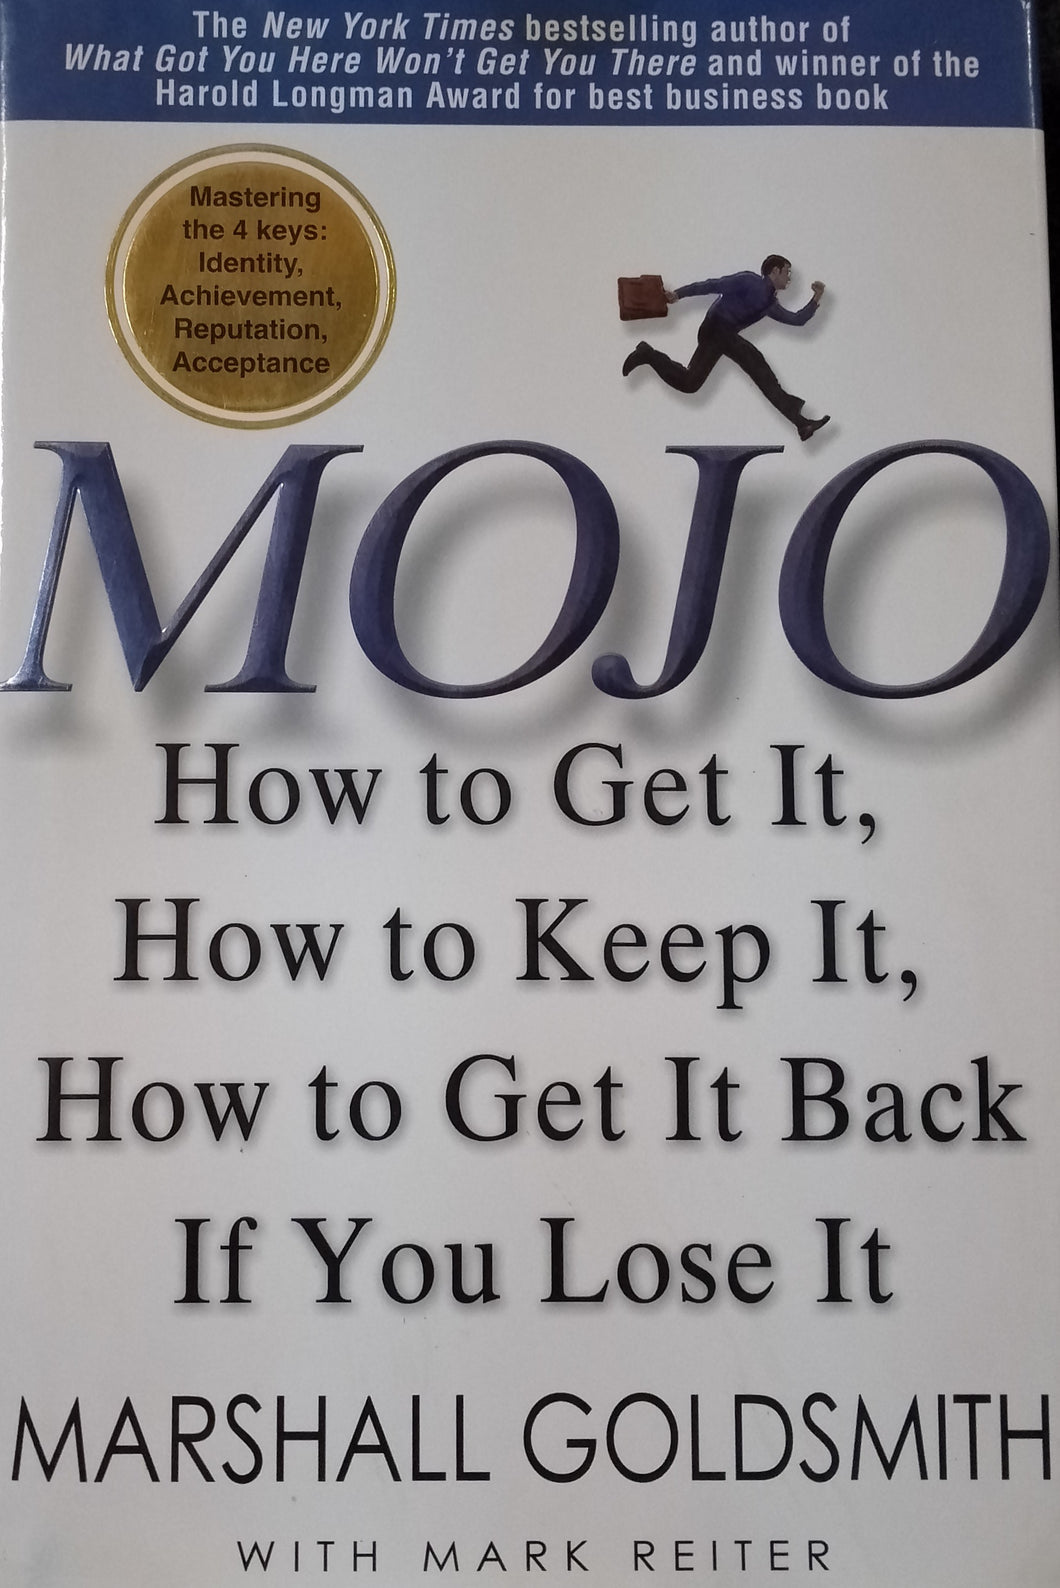 Mojo How To Get It, How To Keep It: by Marshall Goldsmith - Books for Less Online Bookstore